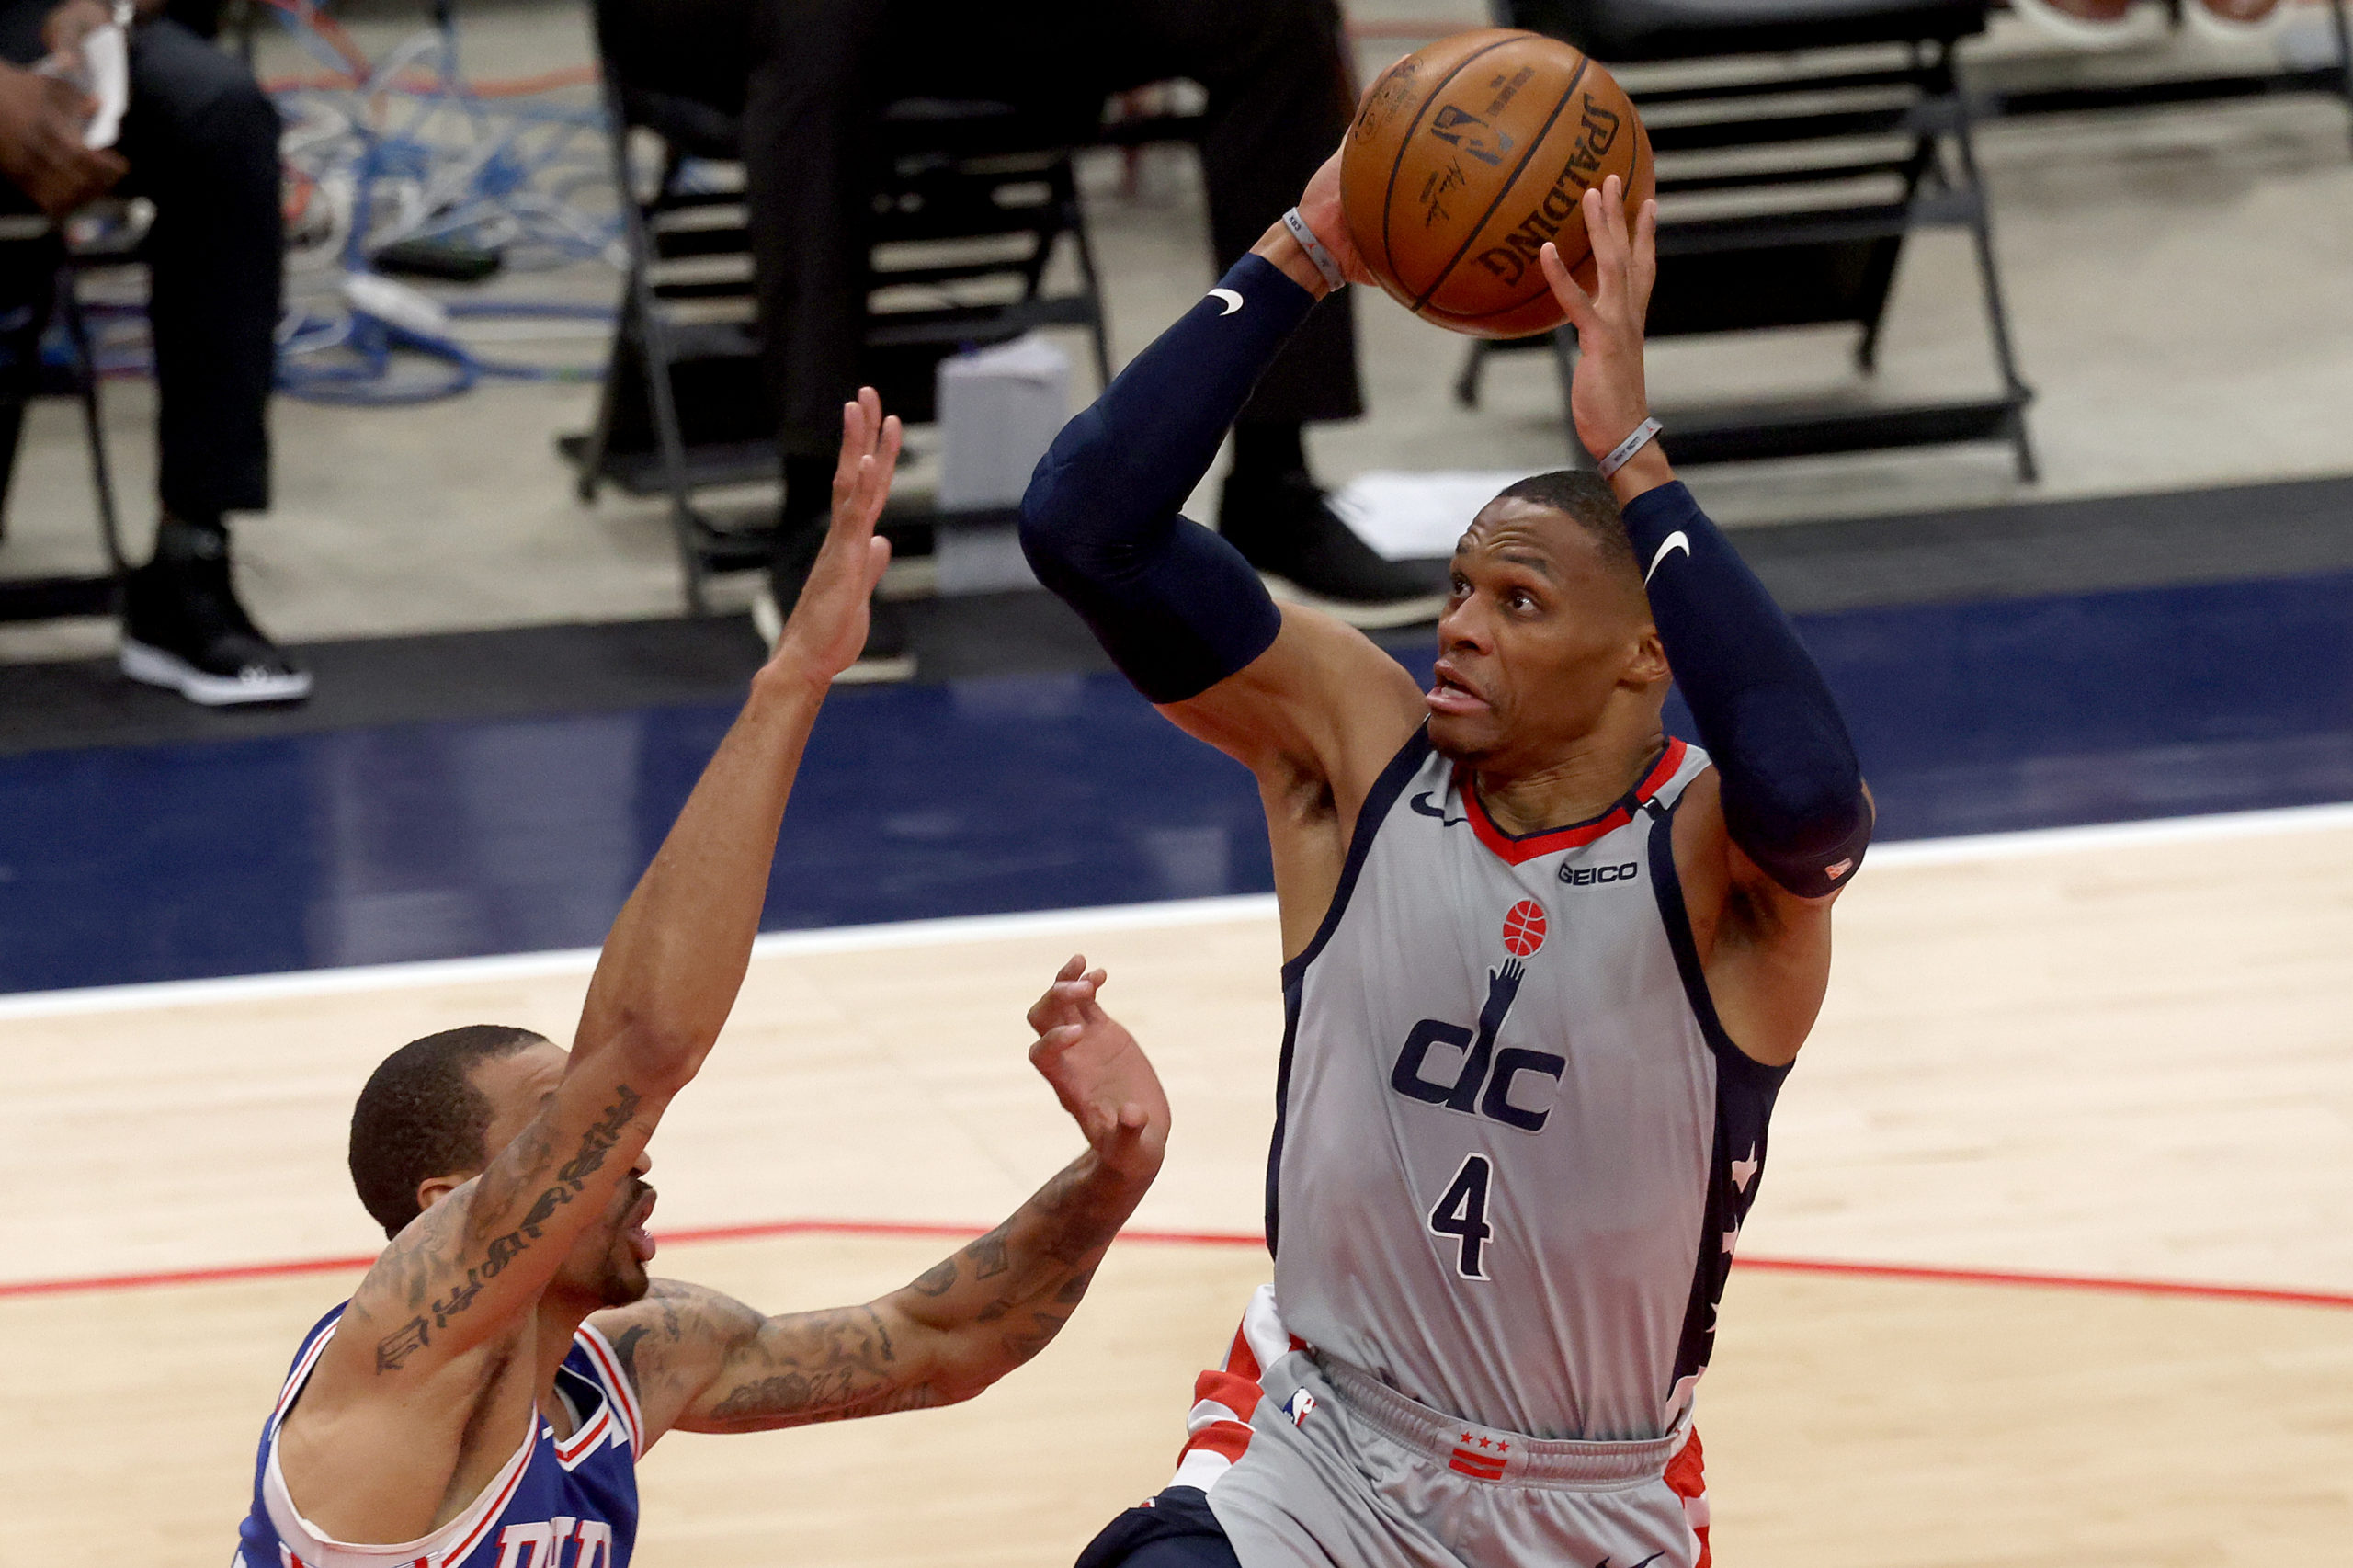 WASHINGTON, DC - MAY 29: Russell Westbrook #4 of the Washington Wizards puts up a shot against George Hill #33 of the Philadelphia 76ers in the first half during Game Three of the Eastern Conference first round series at Capital One Arena on May 29, 2021 in Washington, DC. Rob Carr/Getty Images